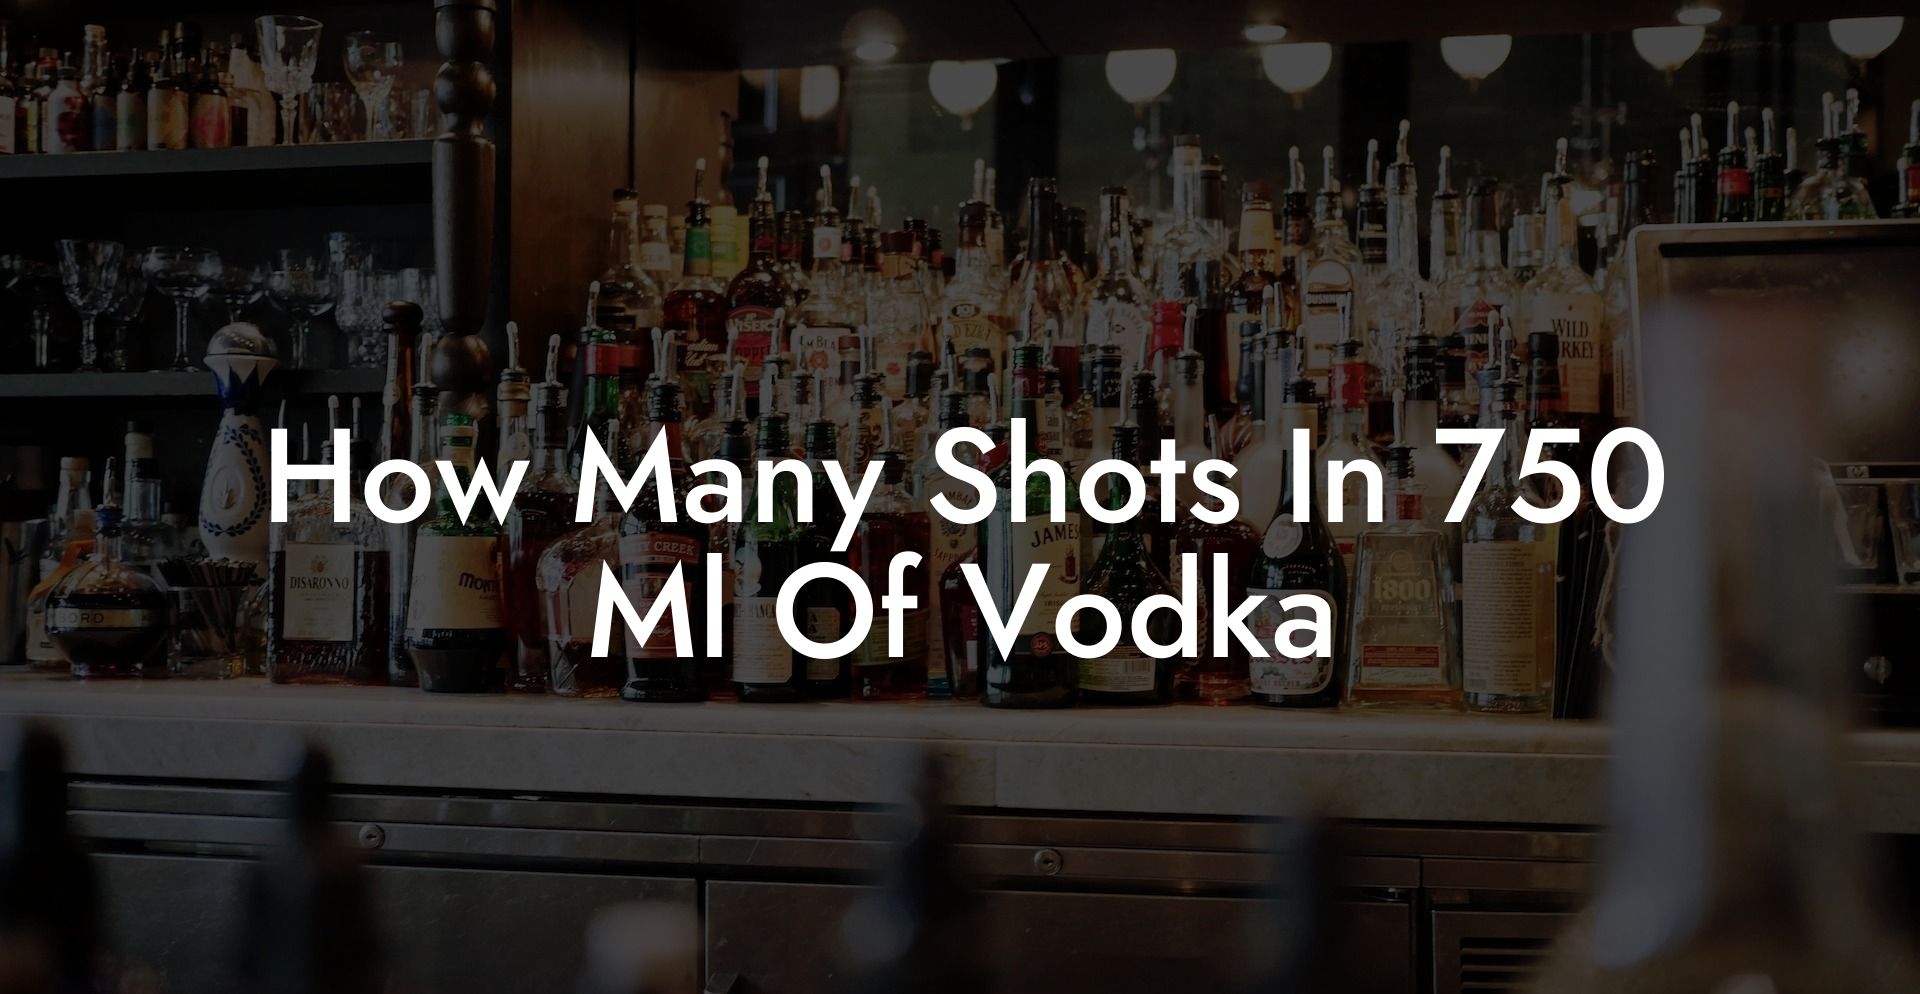 How Many Shots In 750 Ml Of Vodka